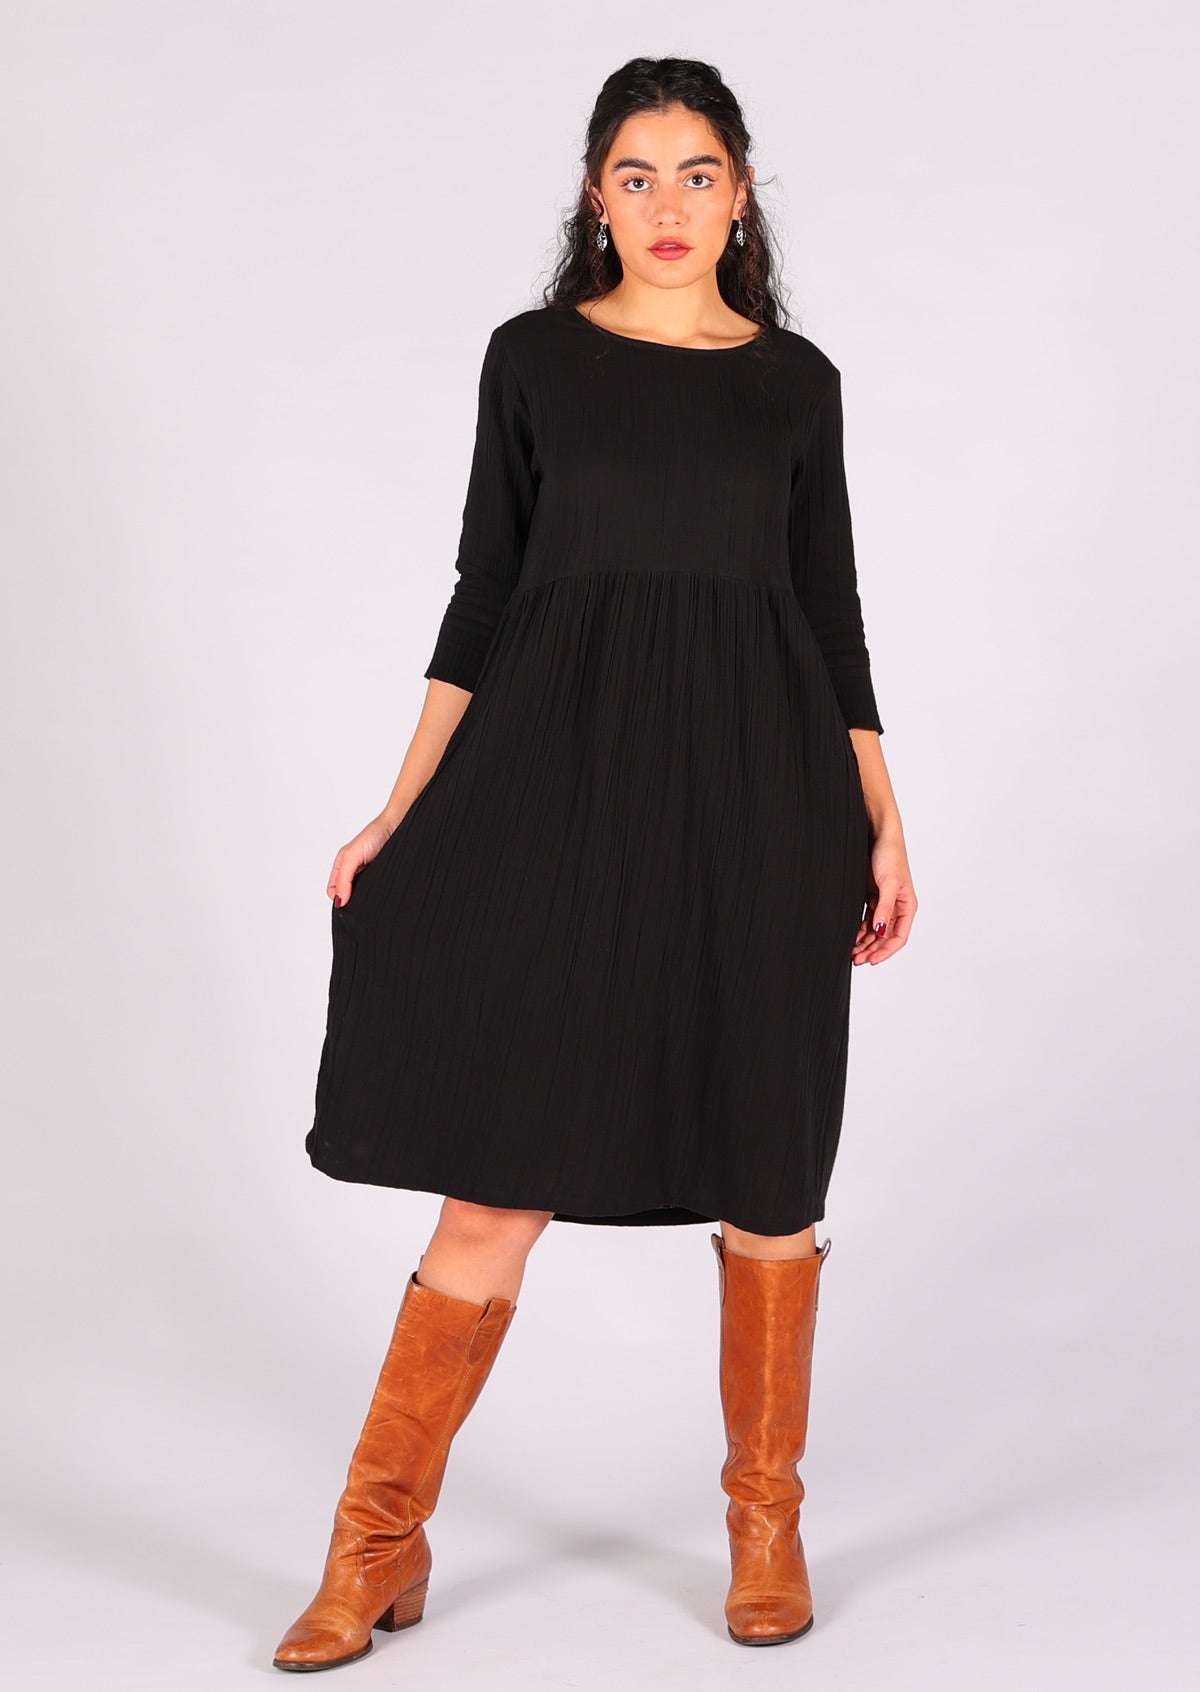 Relaxed fit black dress made out of two layers of lightweight cotton gauze basted together